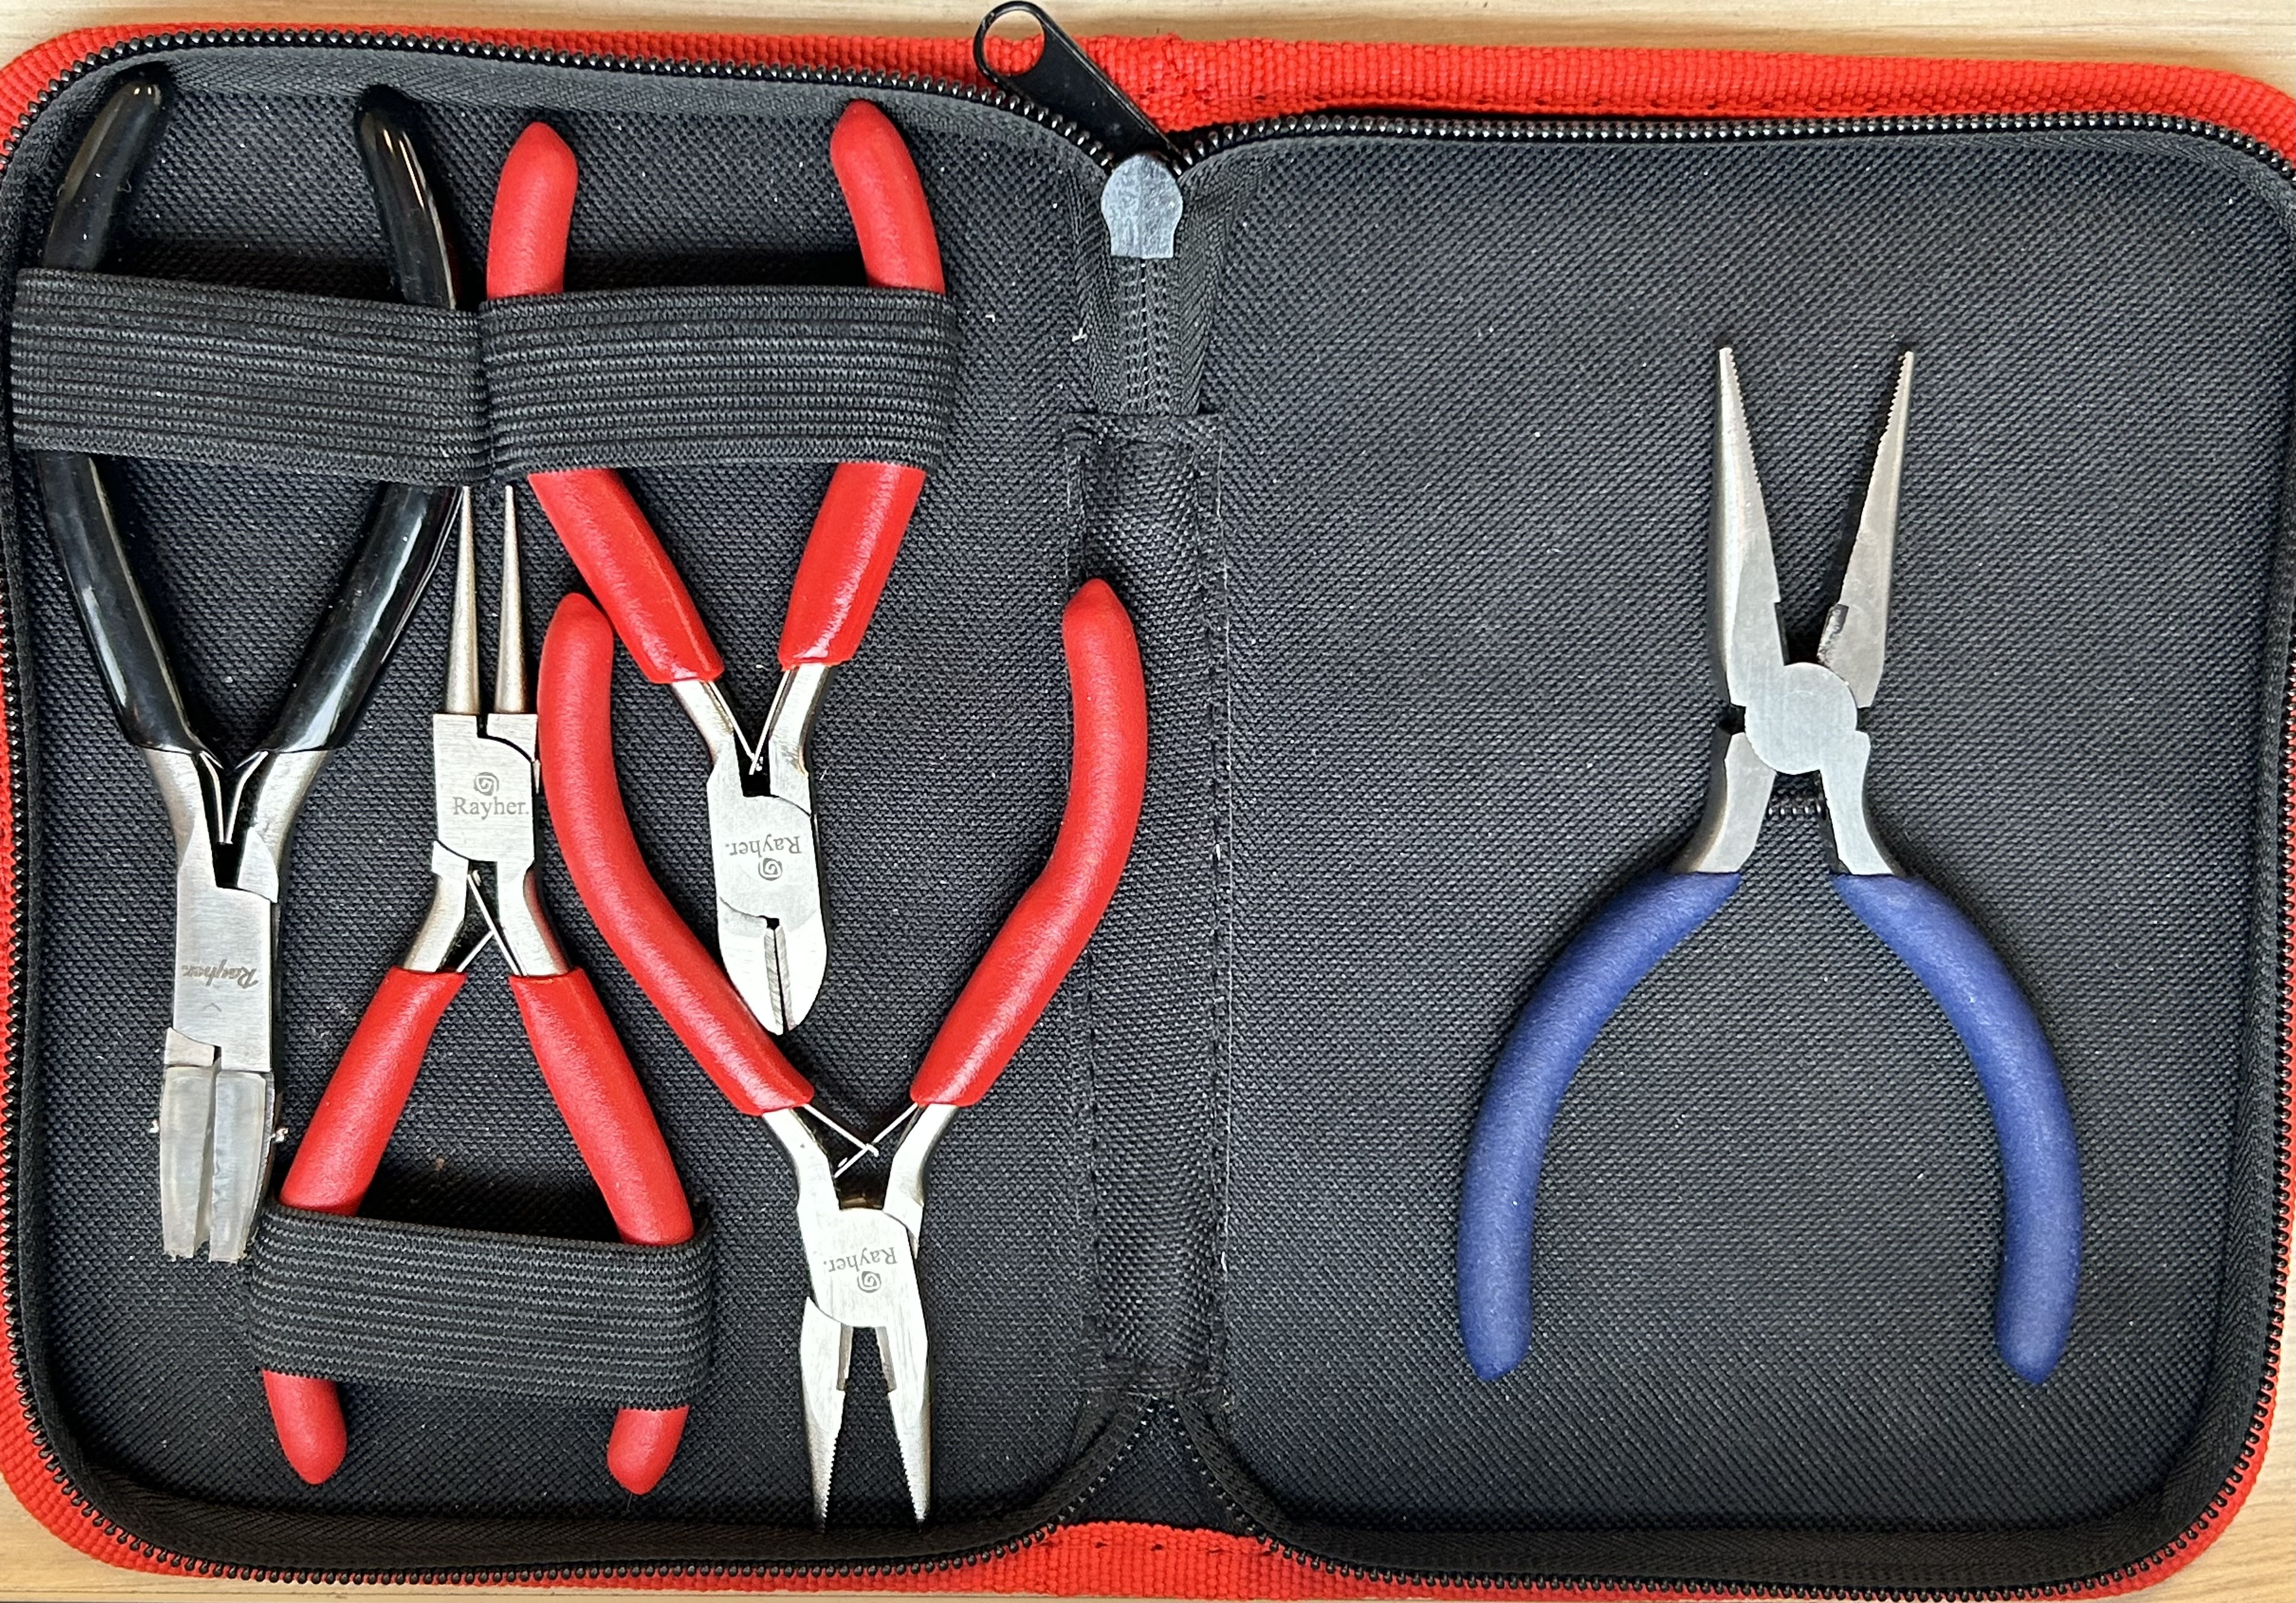 zippered case of pliers